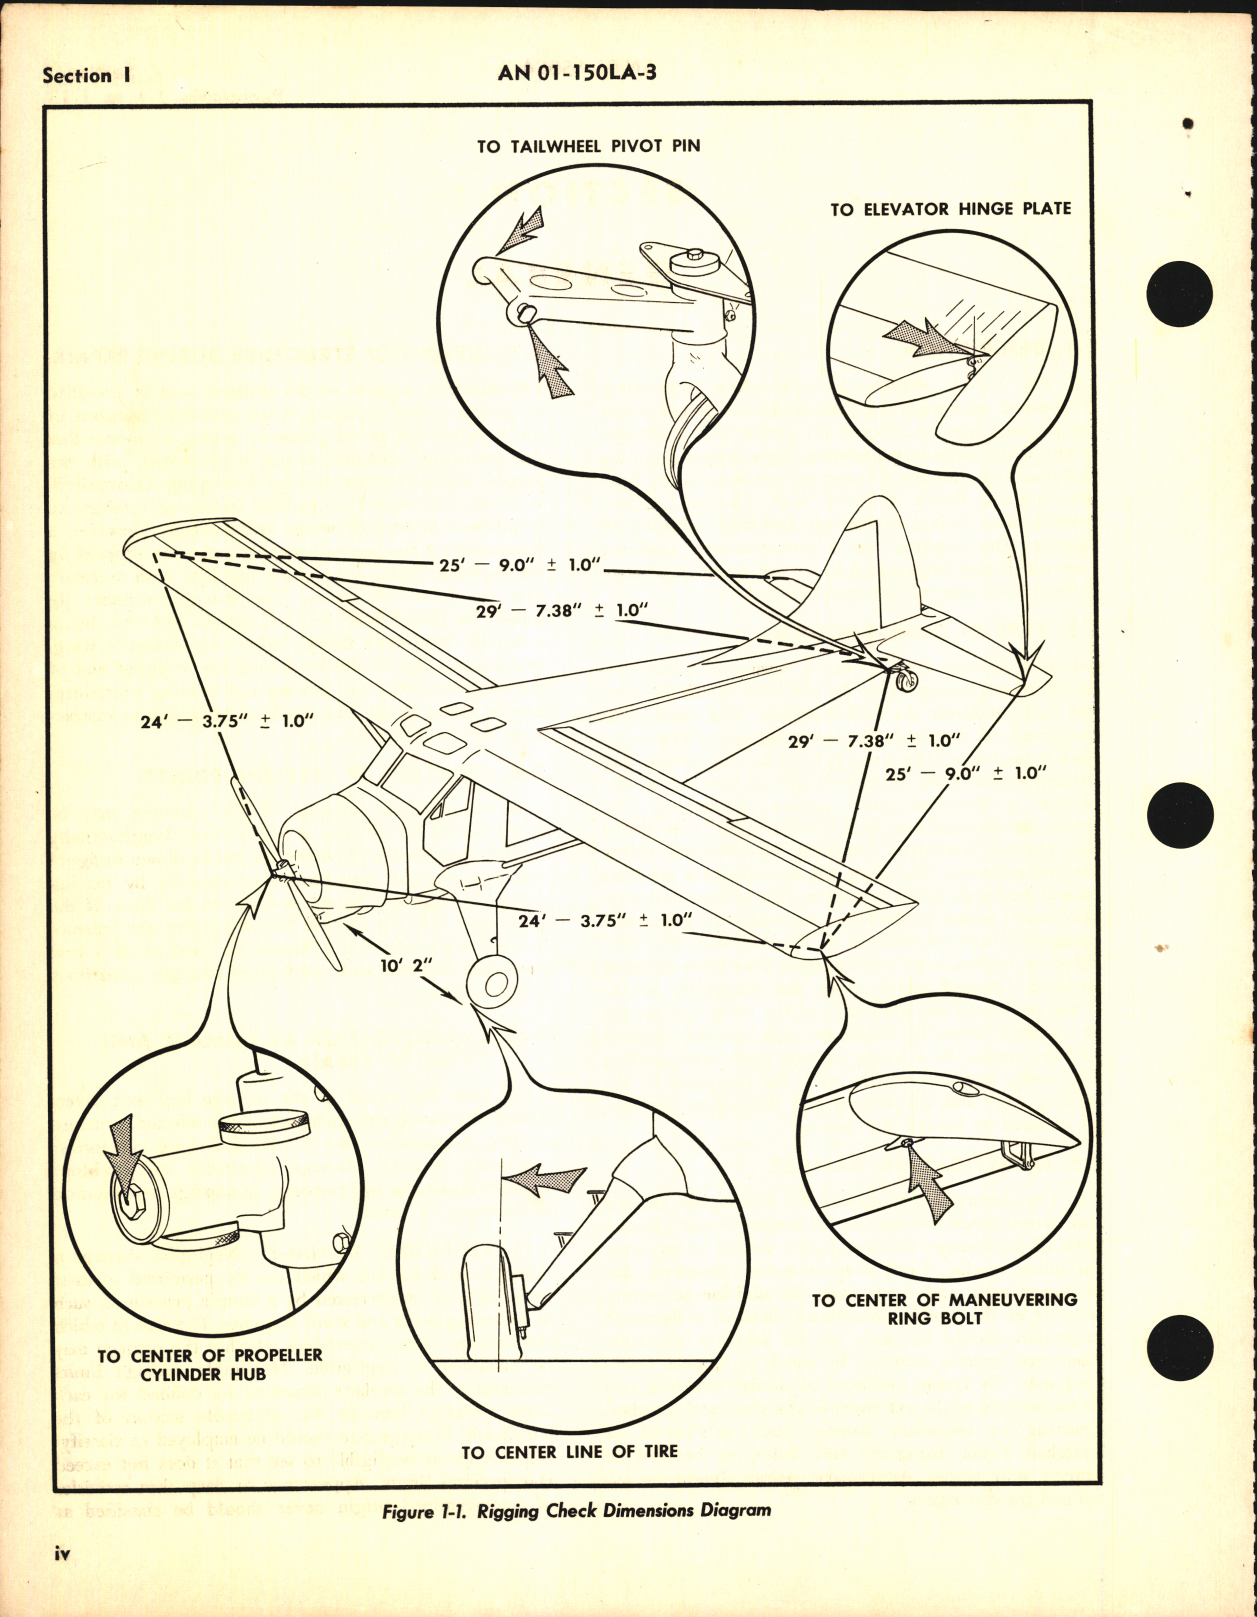 Sample page 6 from AirCorps Library document: Structural Repair Instructions for L-20A